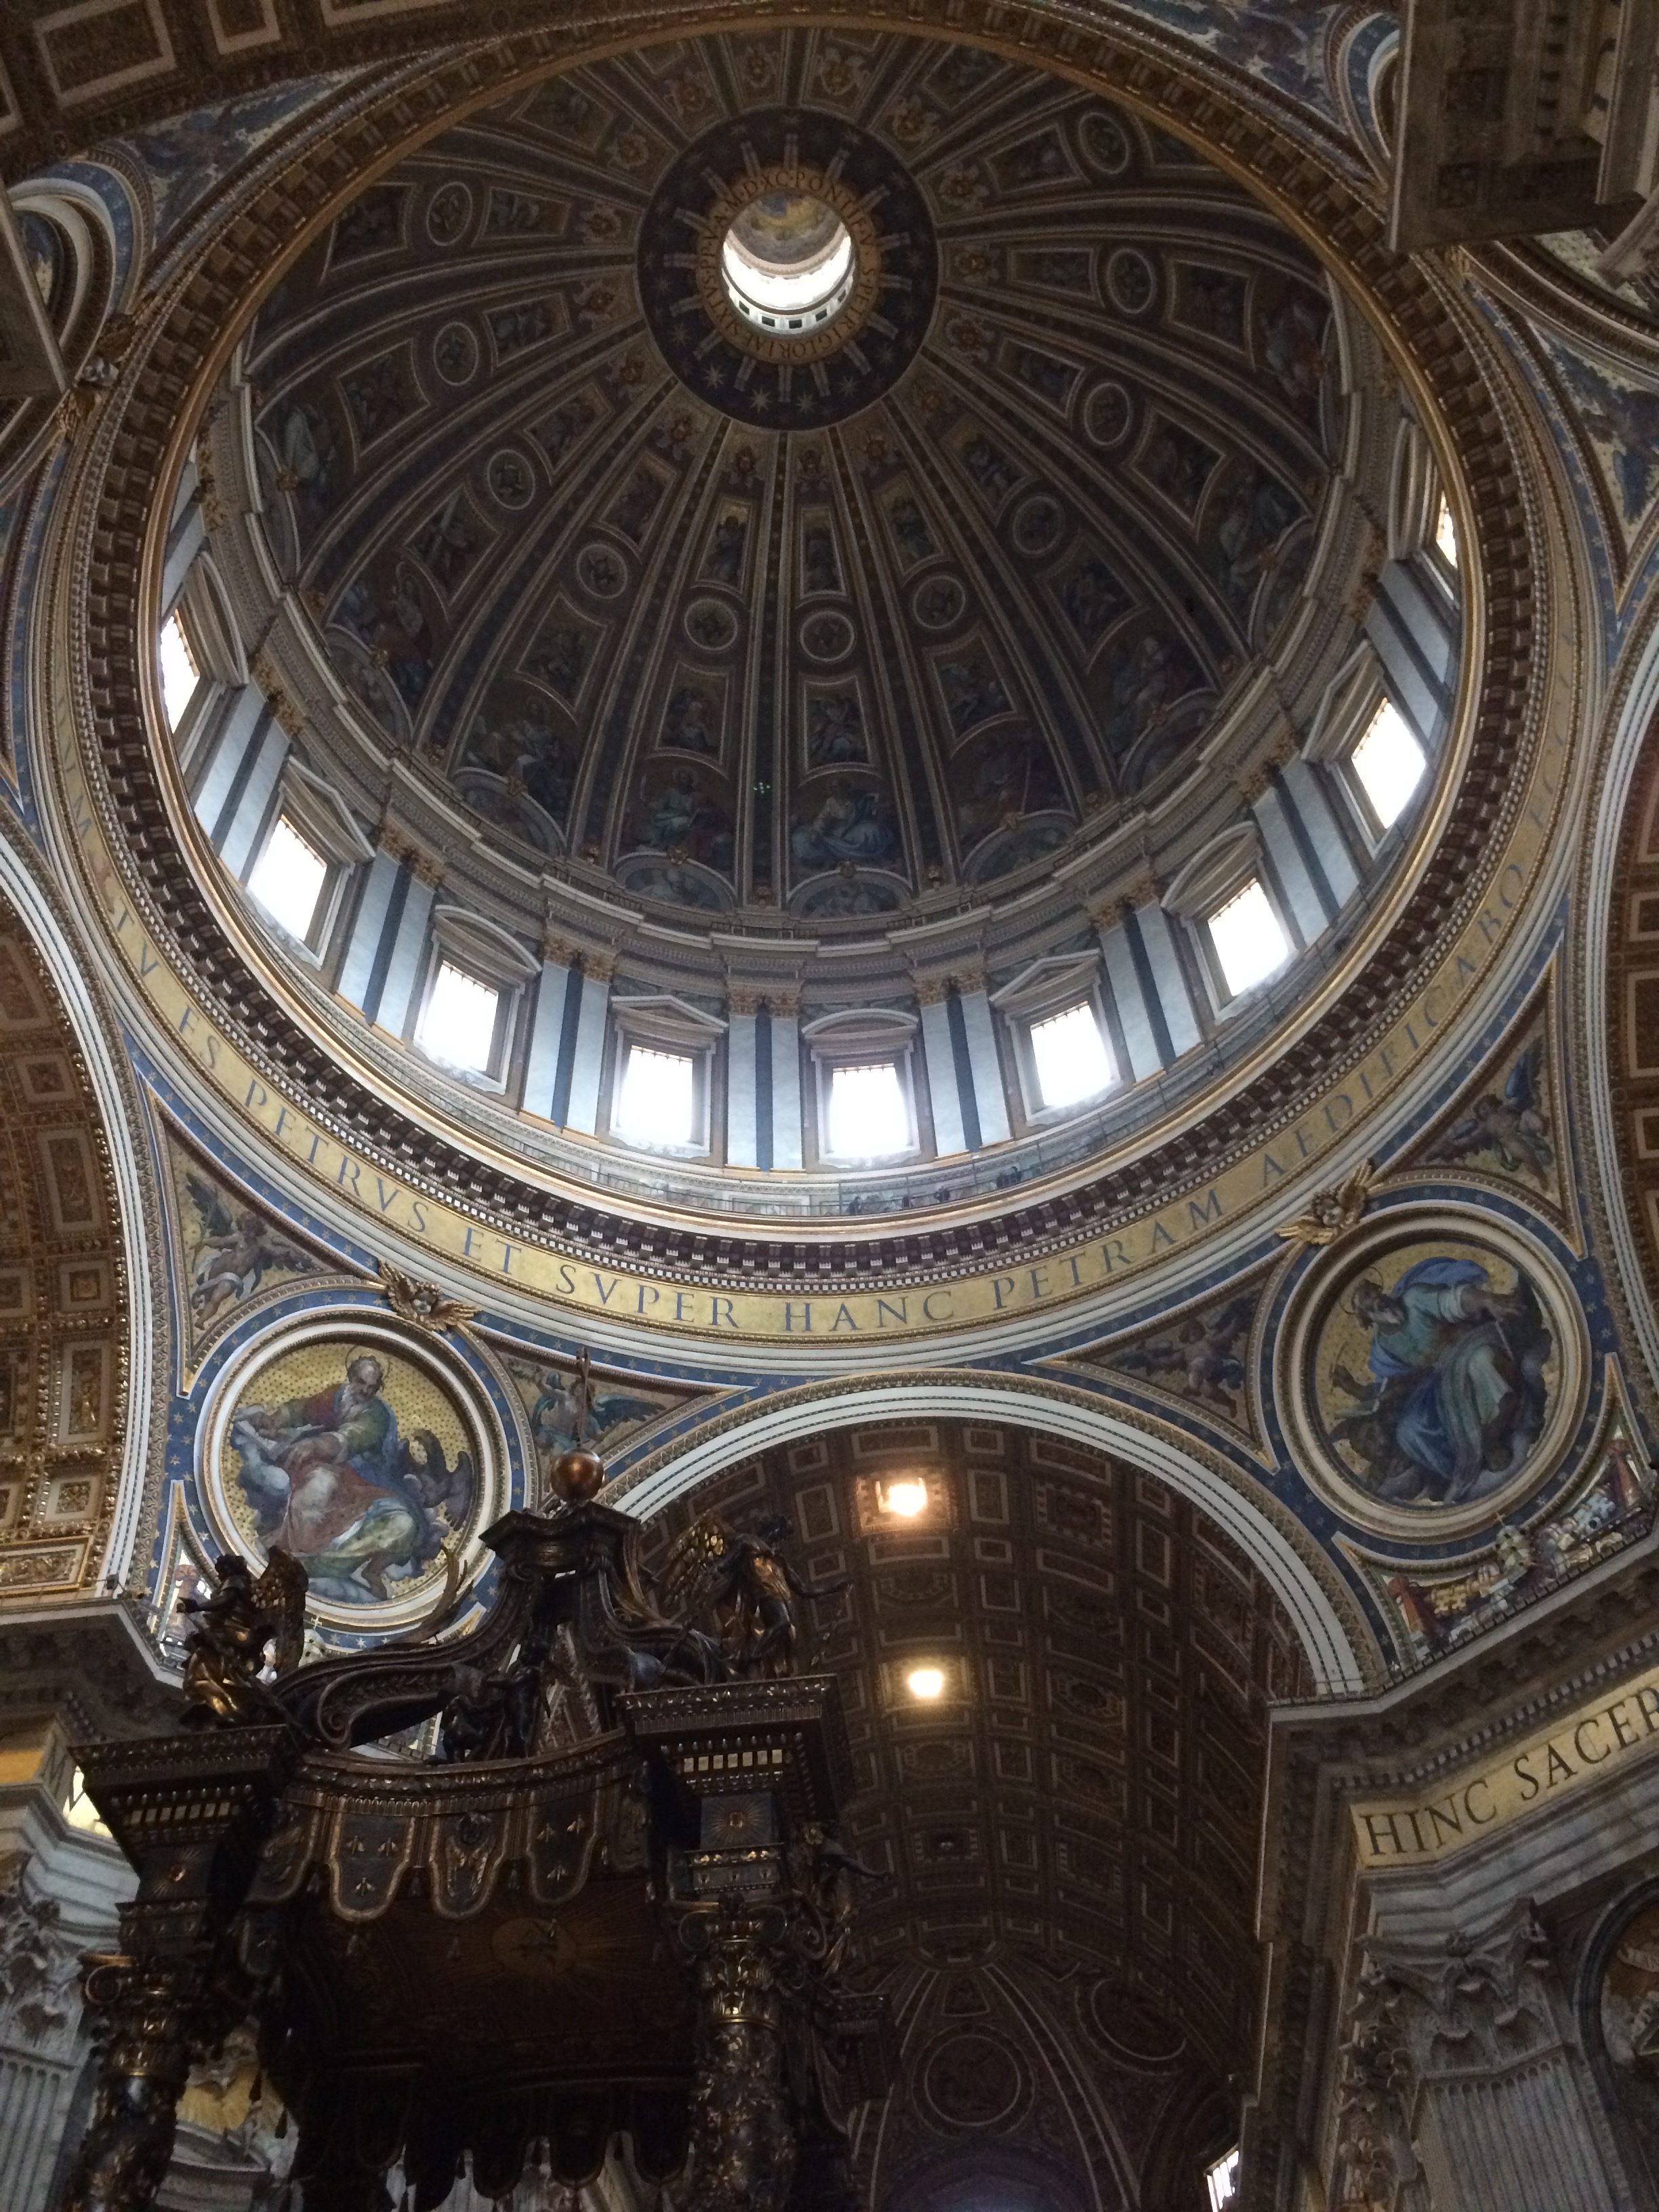 Image of the interior of the Vatican